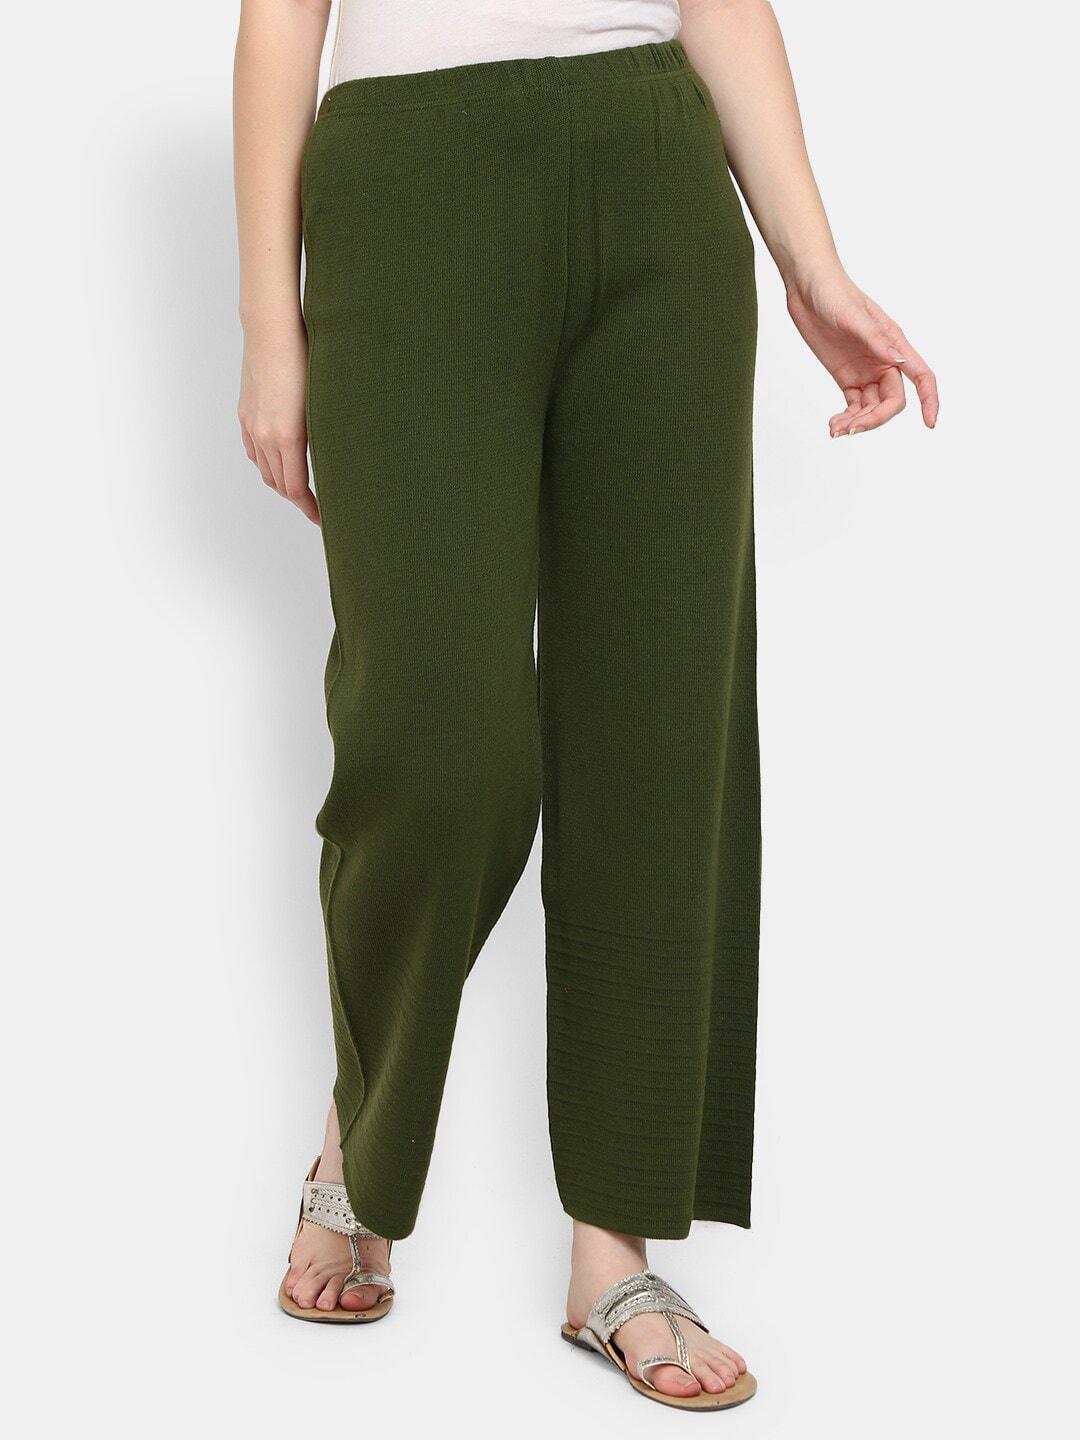 v-mart women olive green solid palazzos